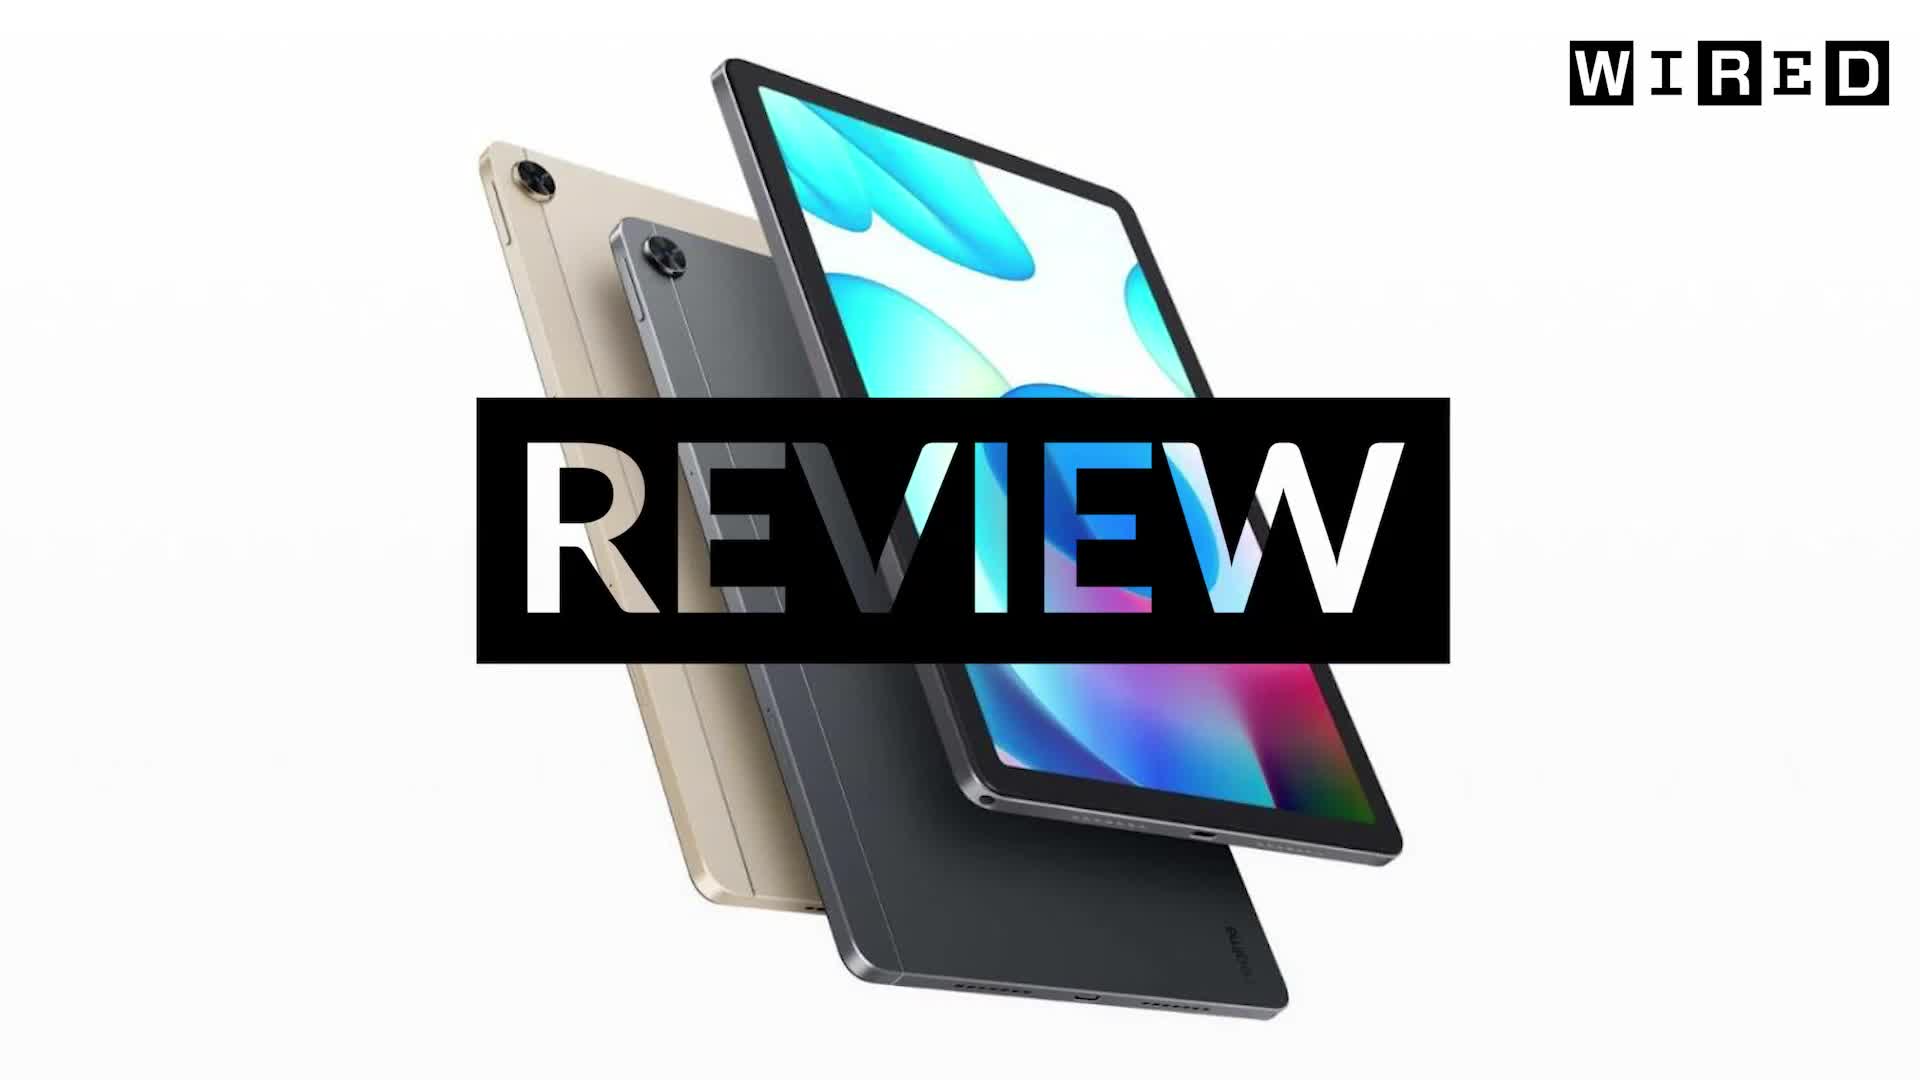 Watch Wired: Recensione in 60 secondi del tablet realme Pad